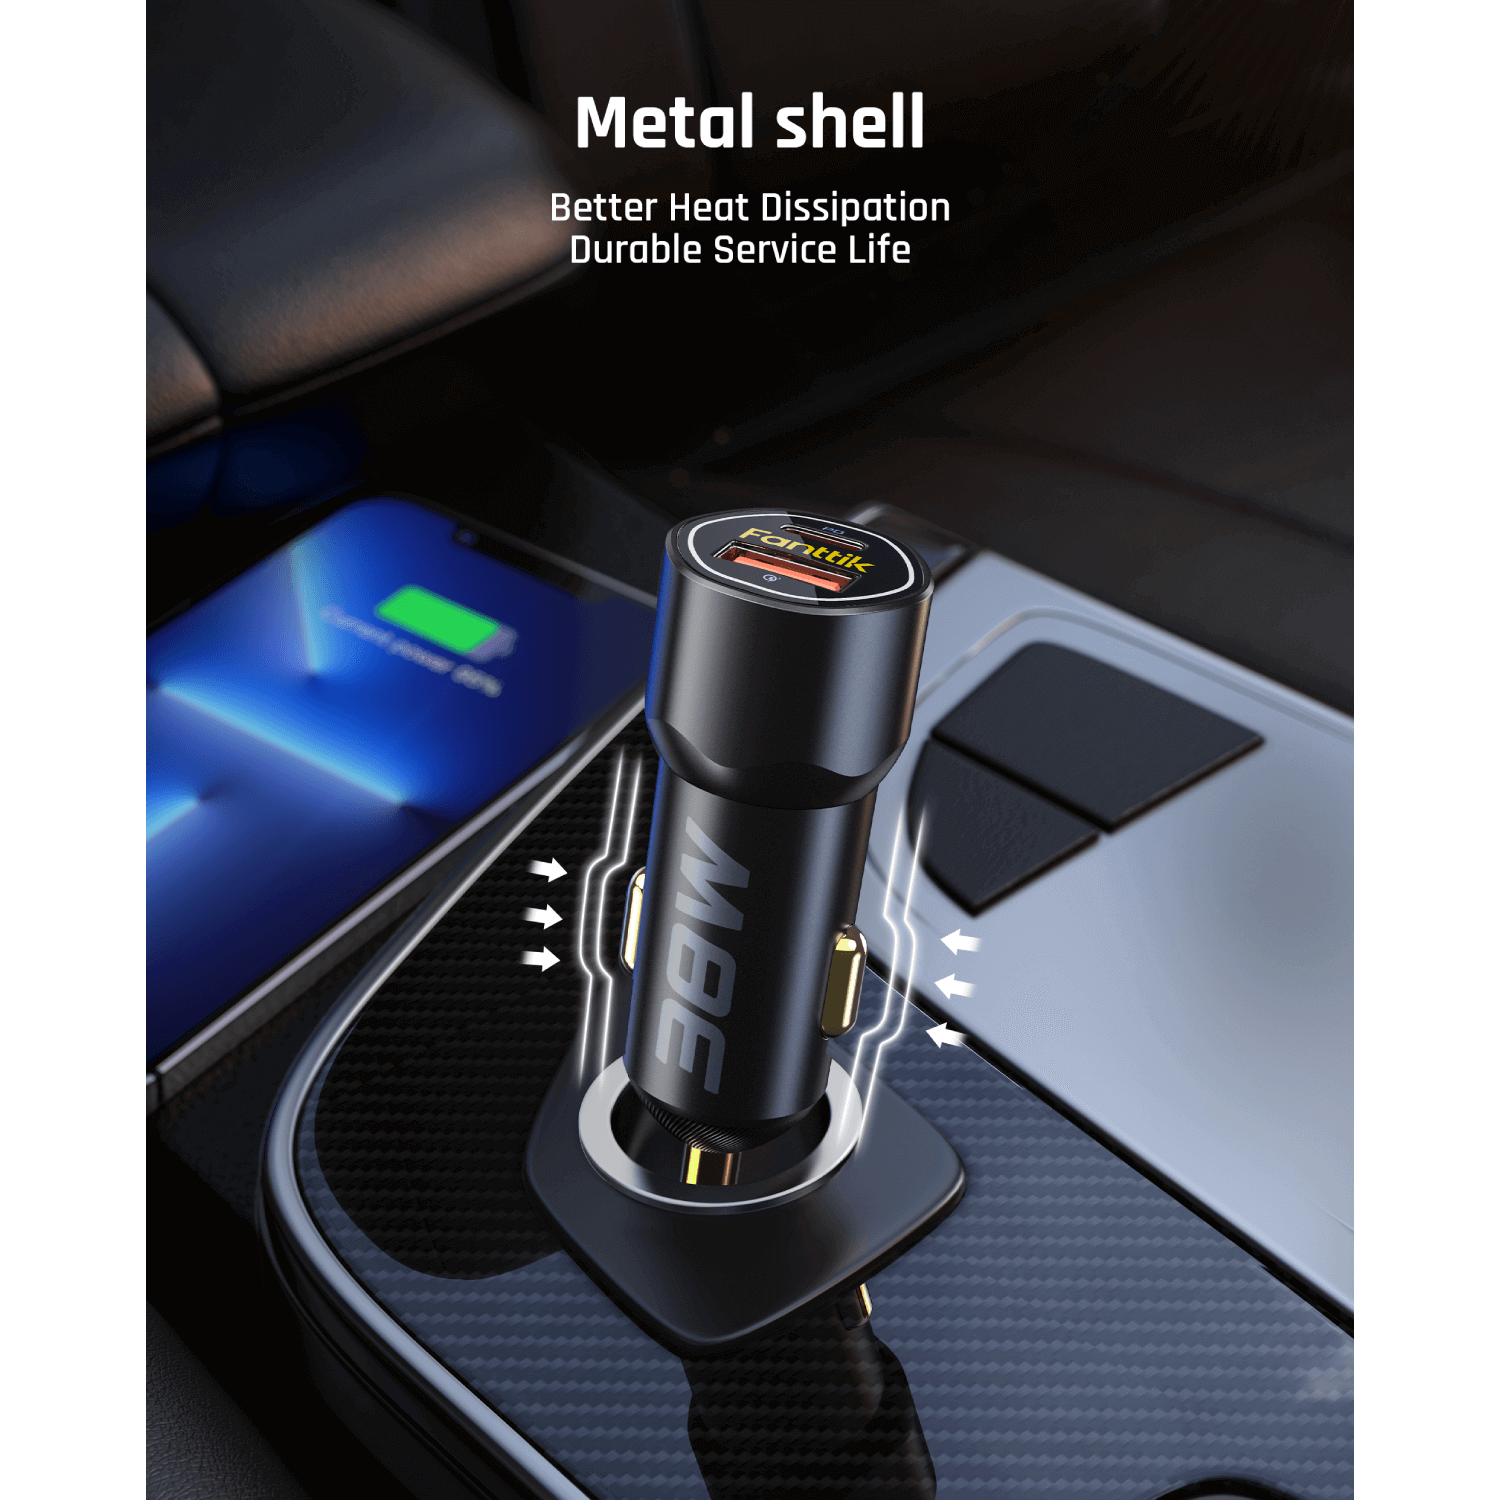 This sturdy aluminum alloy body features exquisite texture and durable service life, and can improve heat dissipation and charging efficiency.